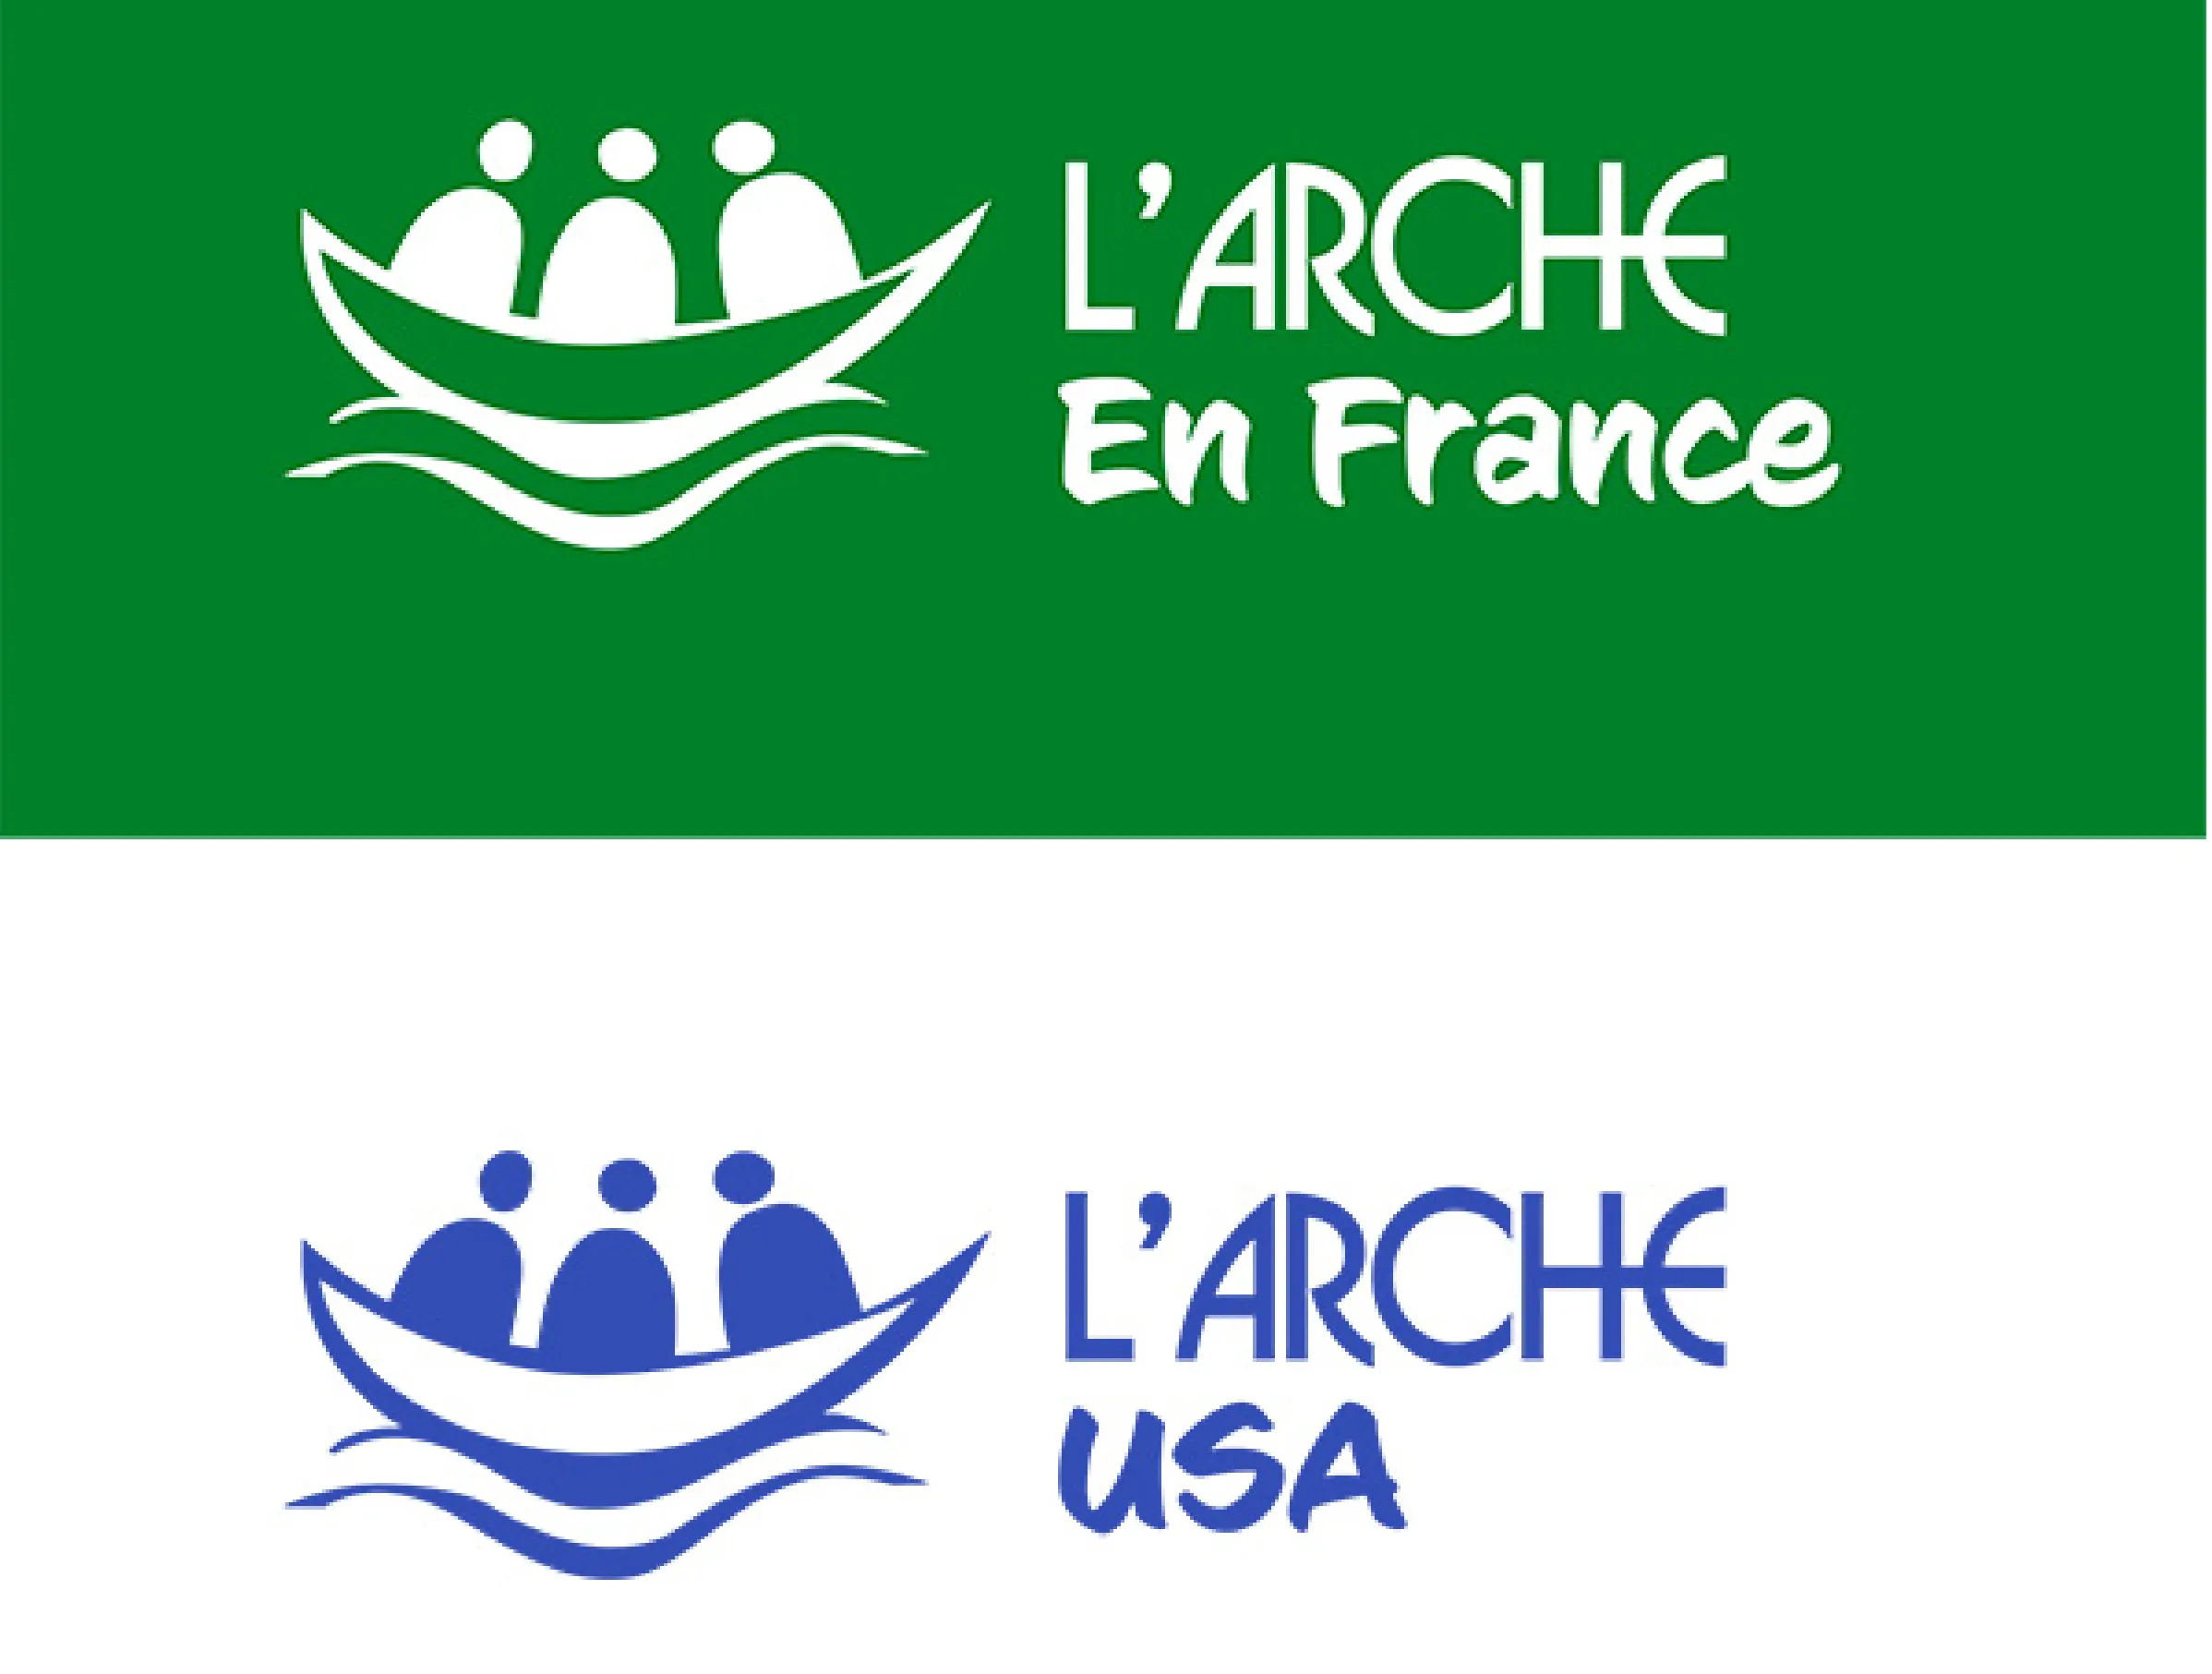 L'arche logo for France and for the USA